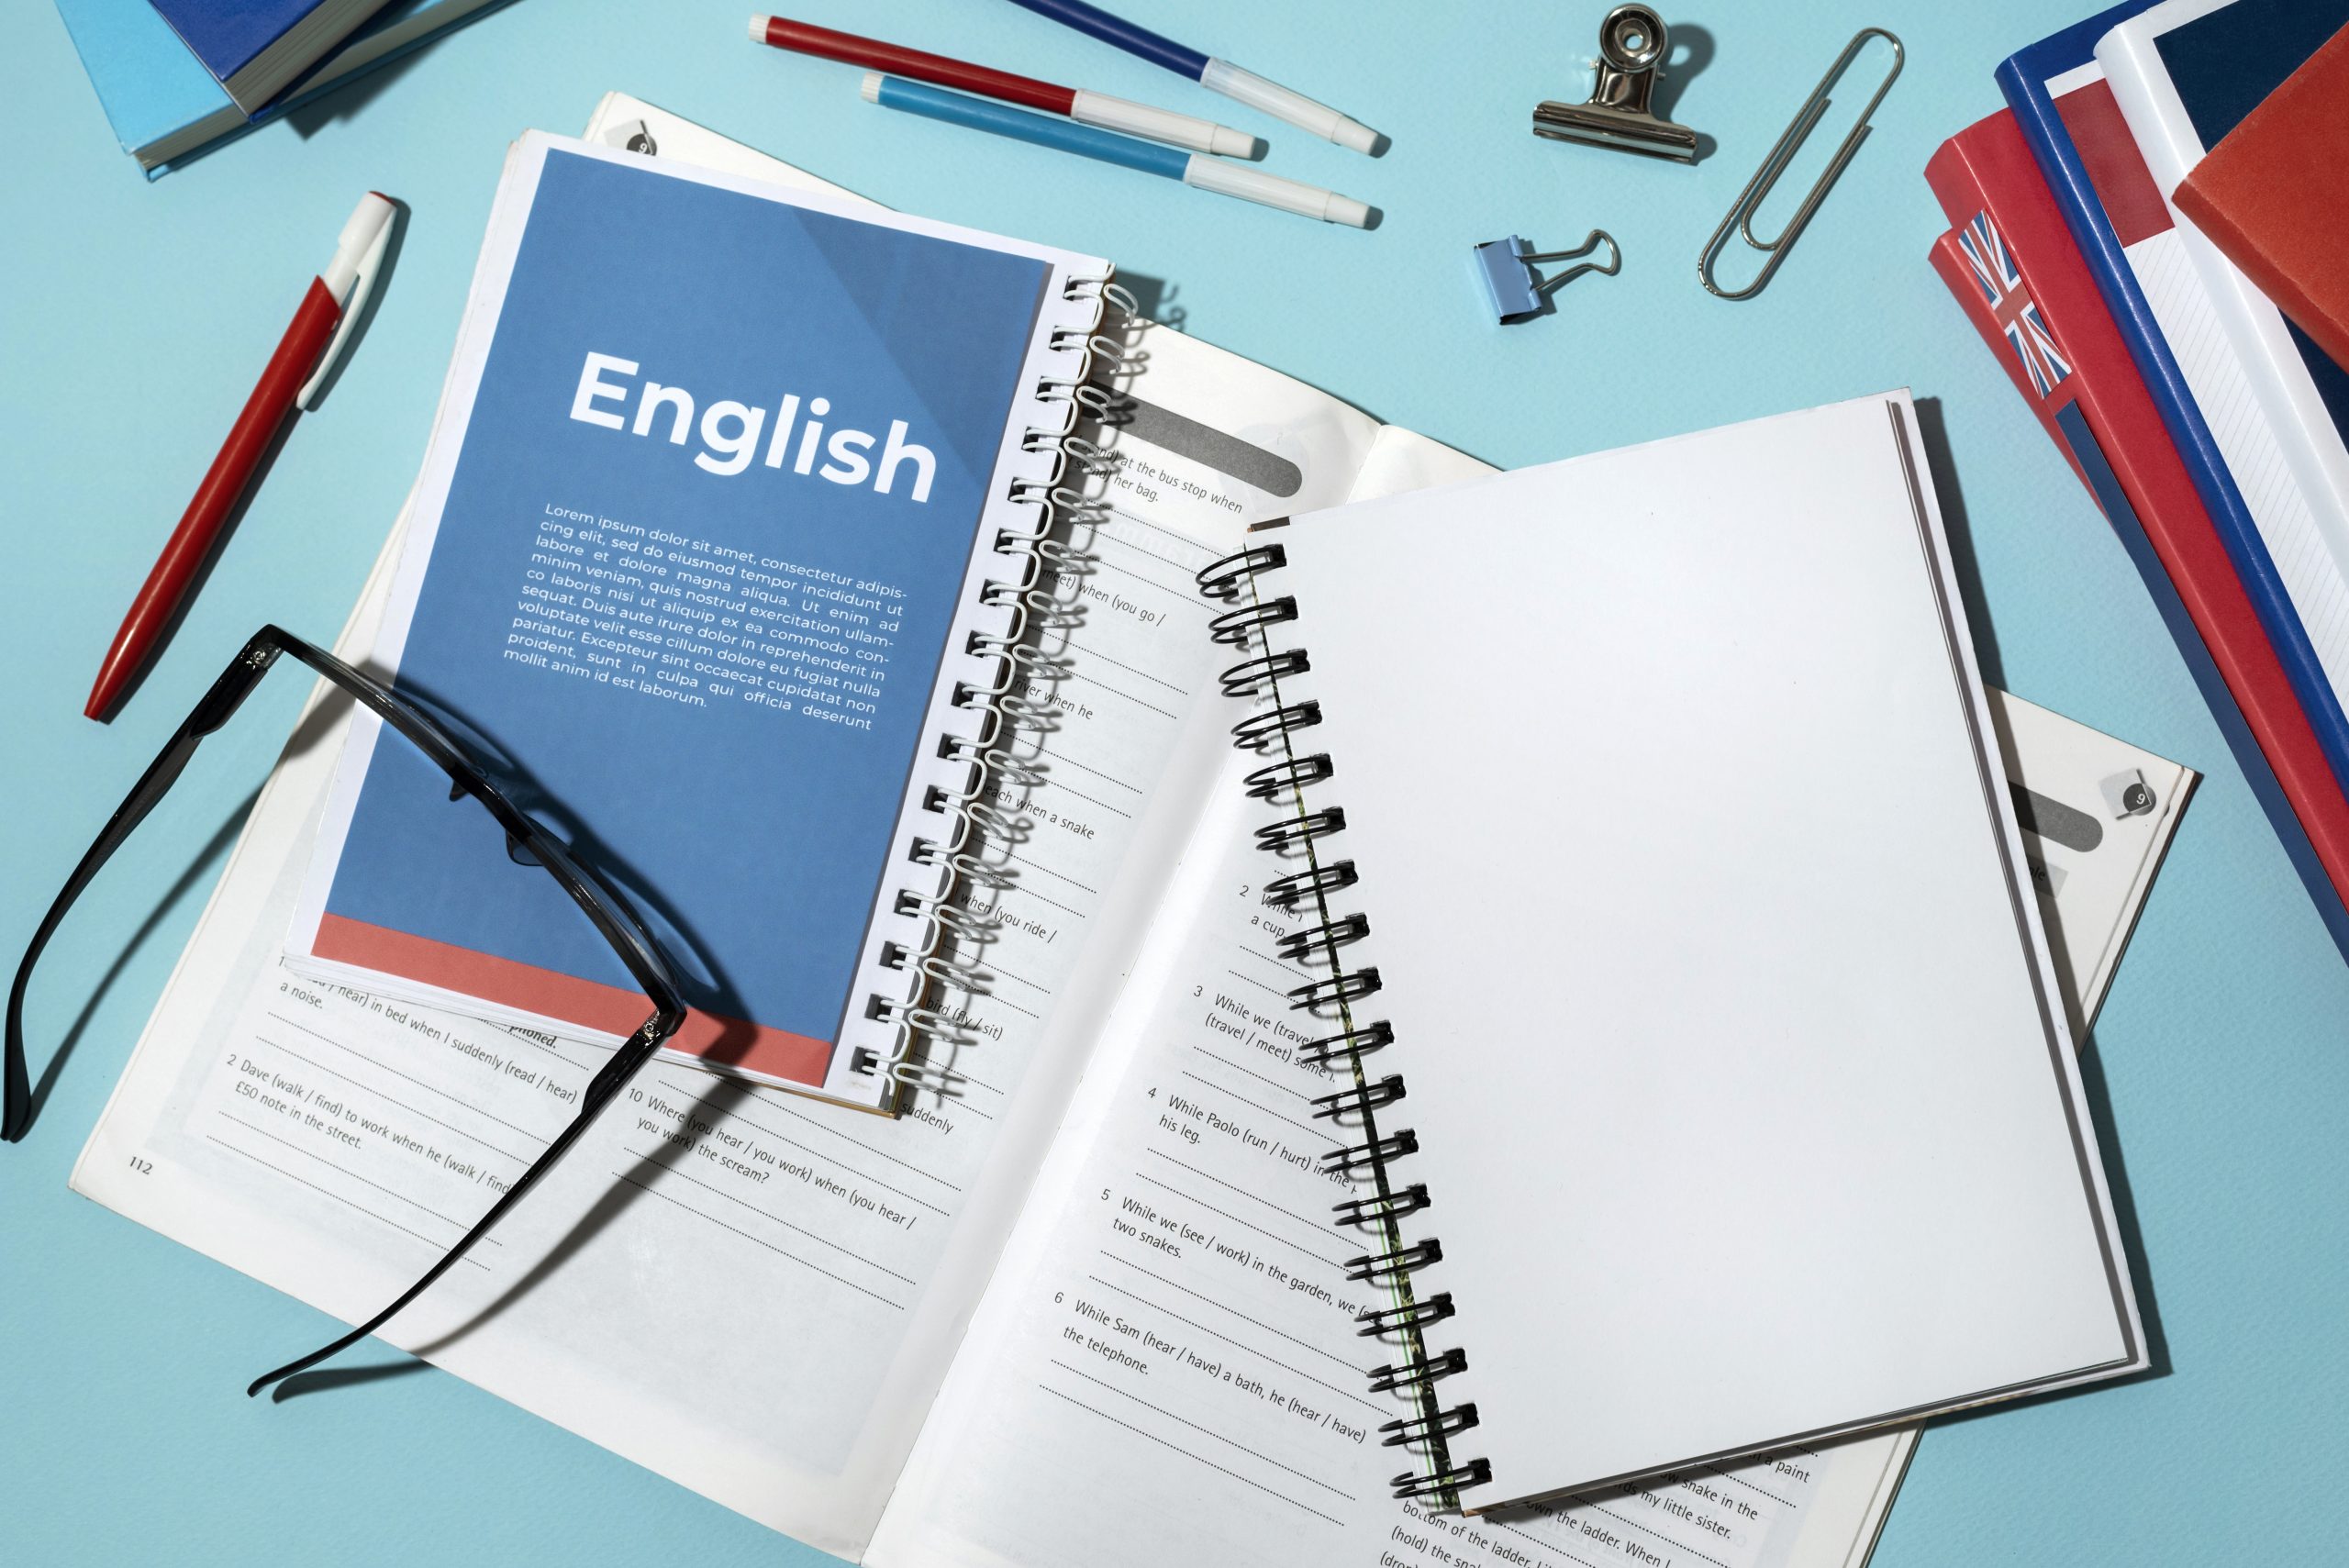 15 Best Tips for improving English quickly and easily